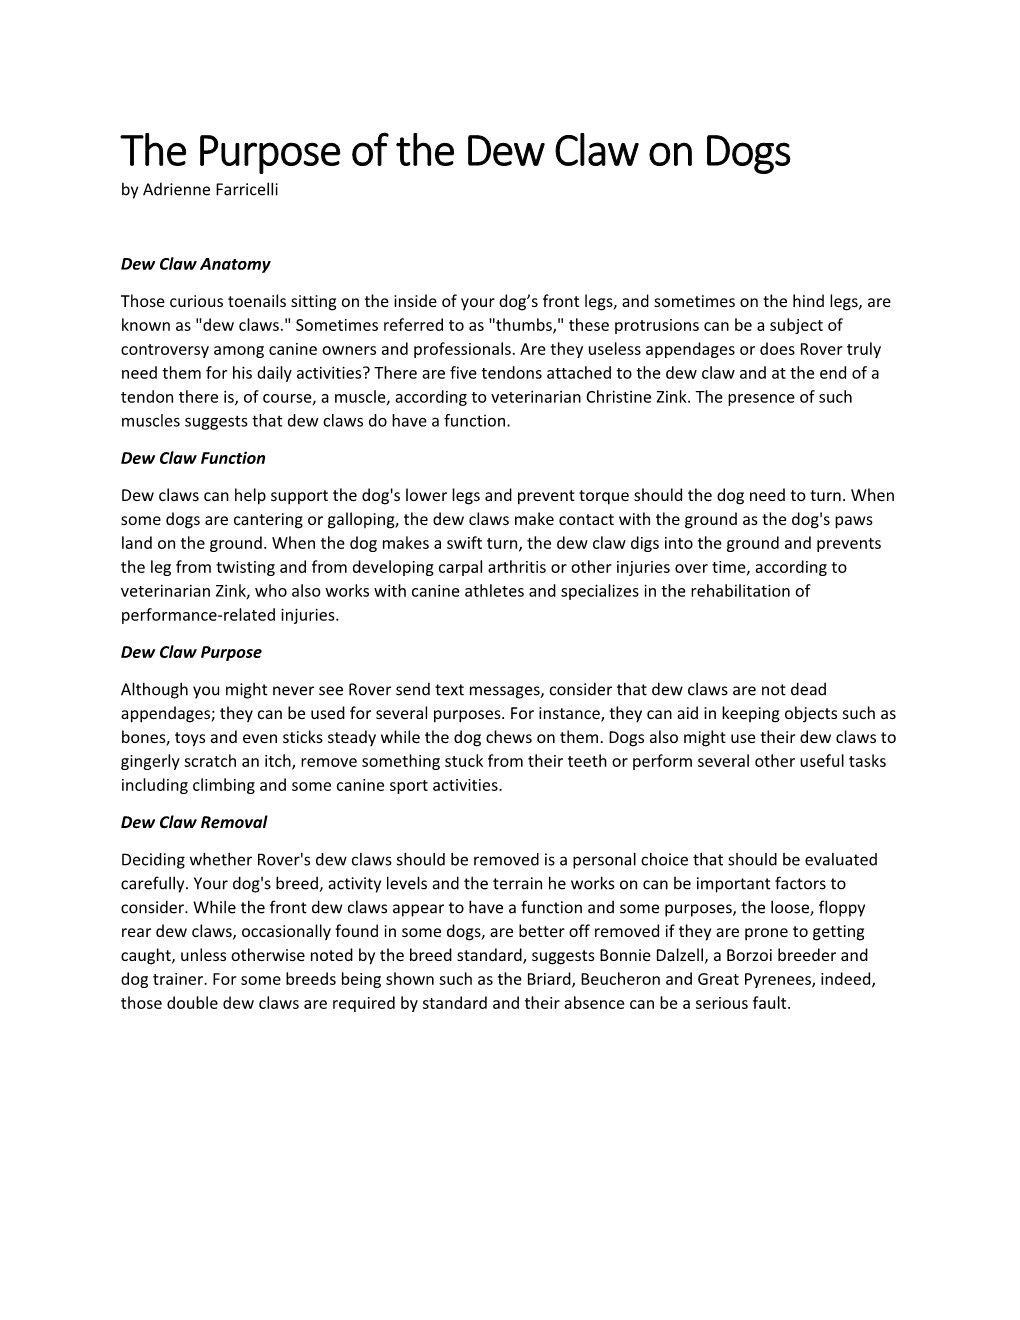 The Purpose of the Dew Claw on Dogs